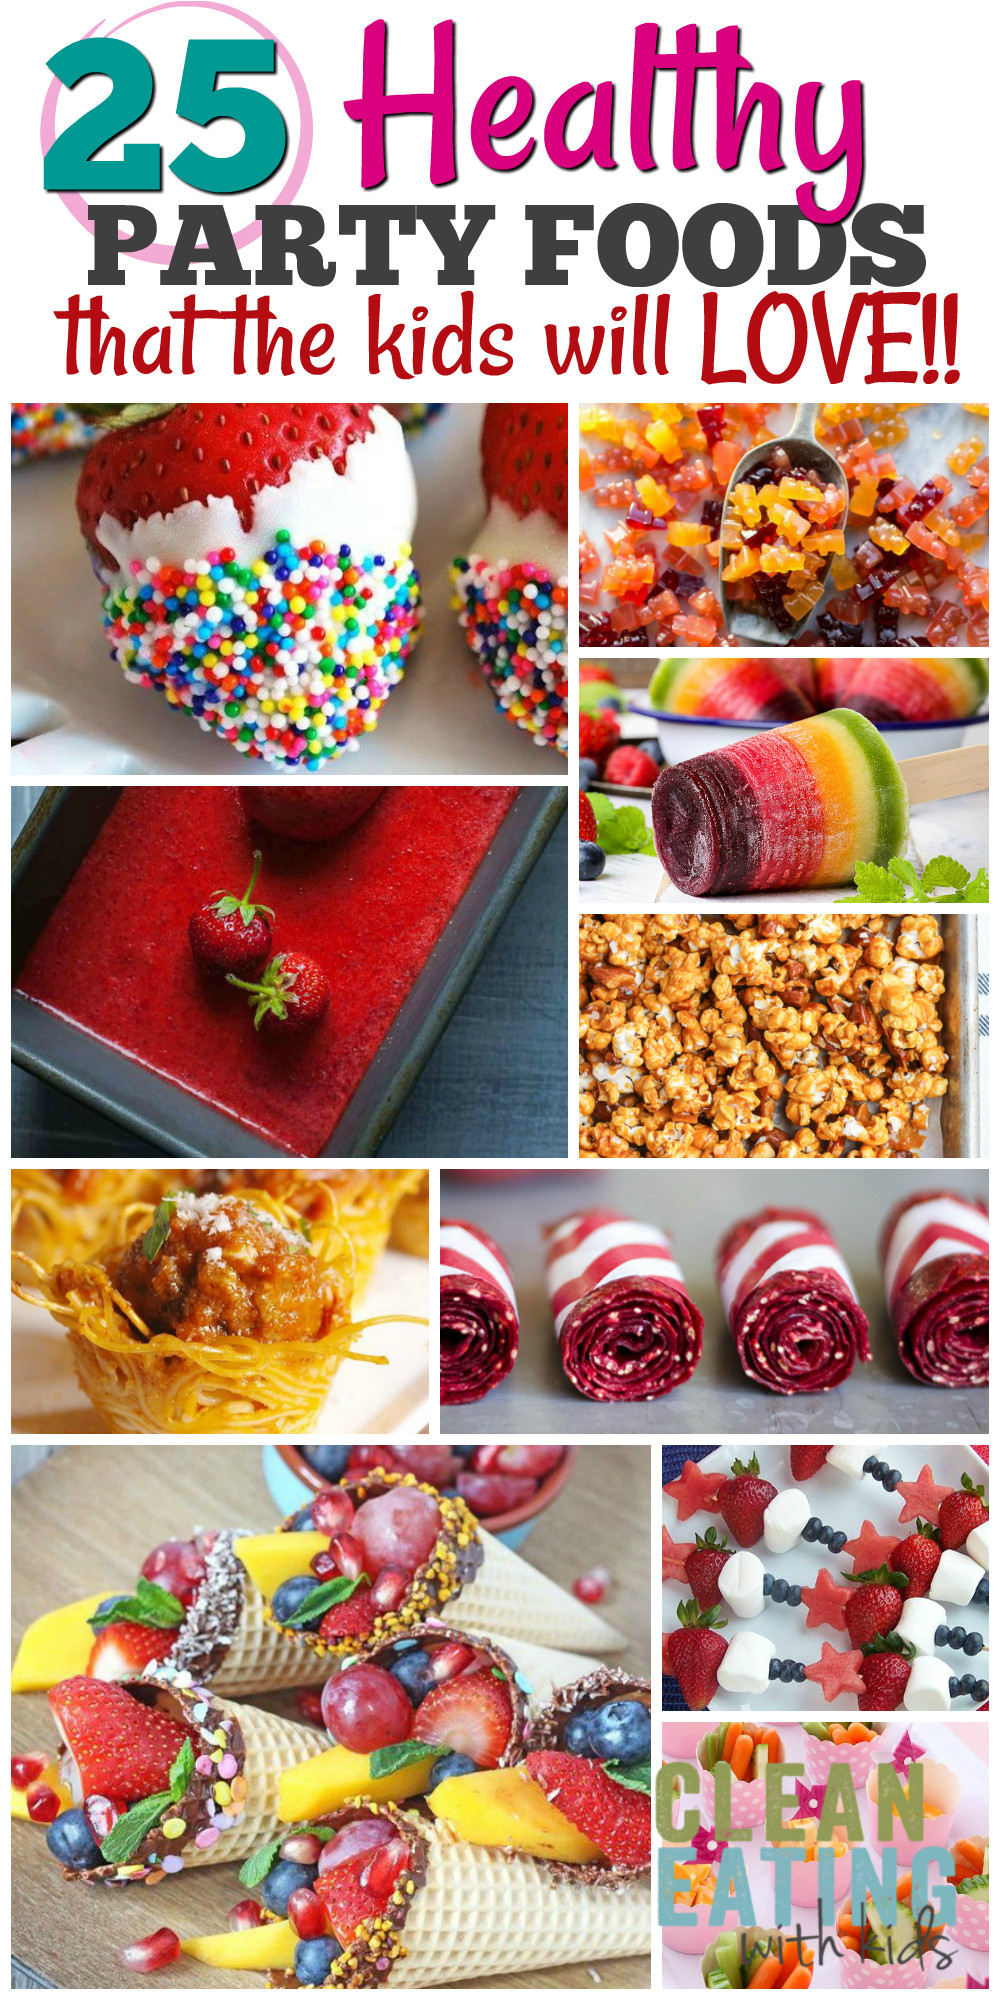 Kid Birthday Party Ideas
 25 Healthy Birthday Party Food Ideas Clean Eating with kids